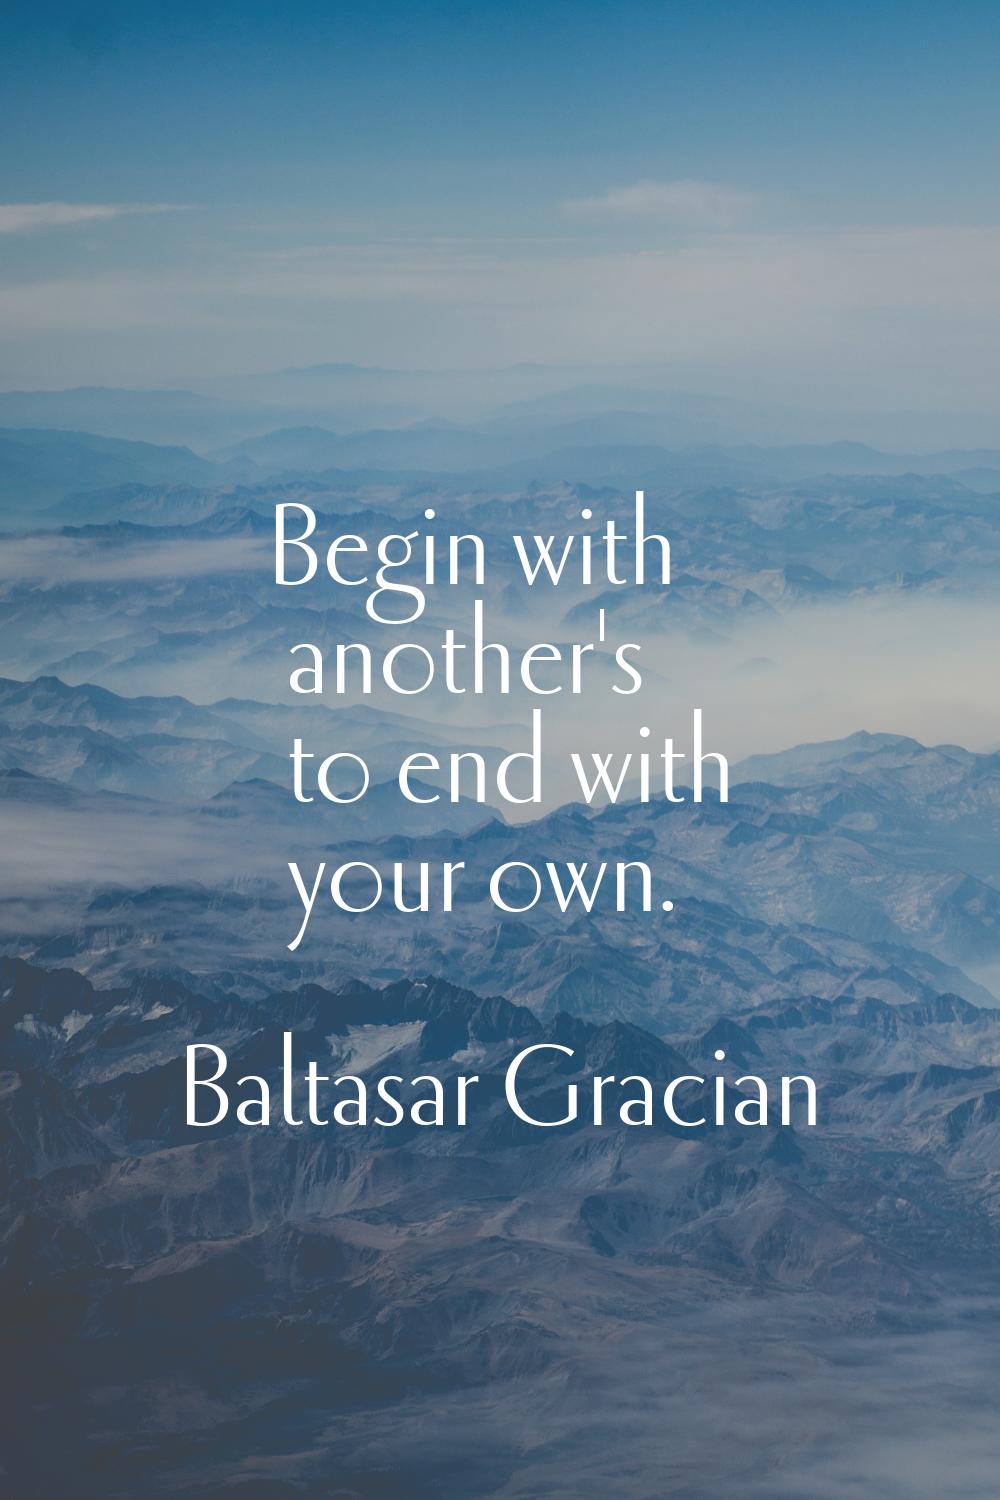 Begin with another's to end with your own.